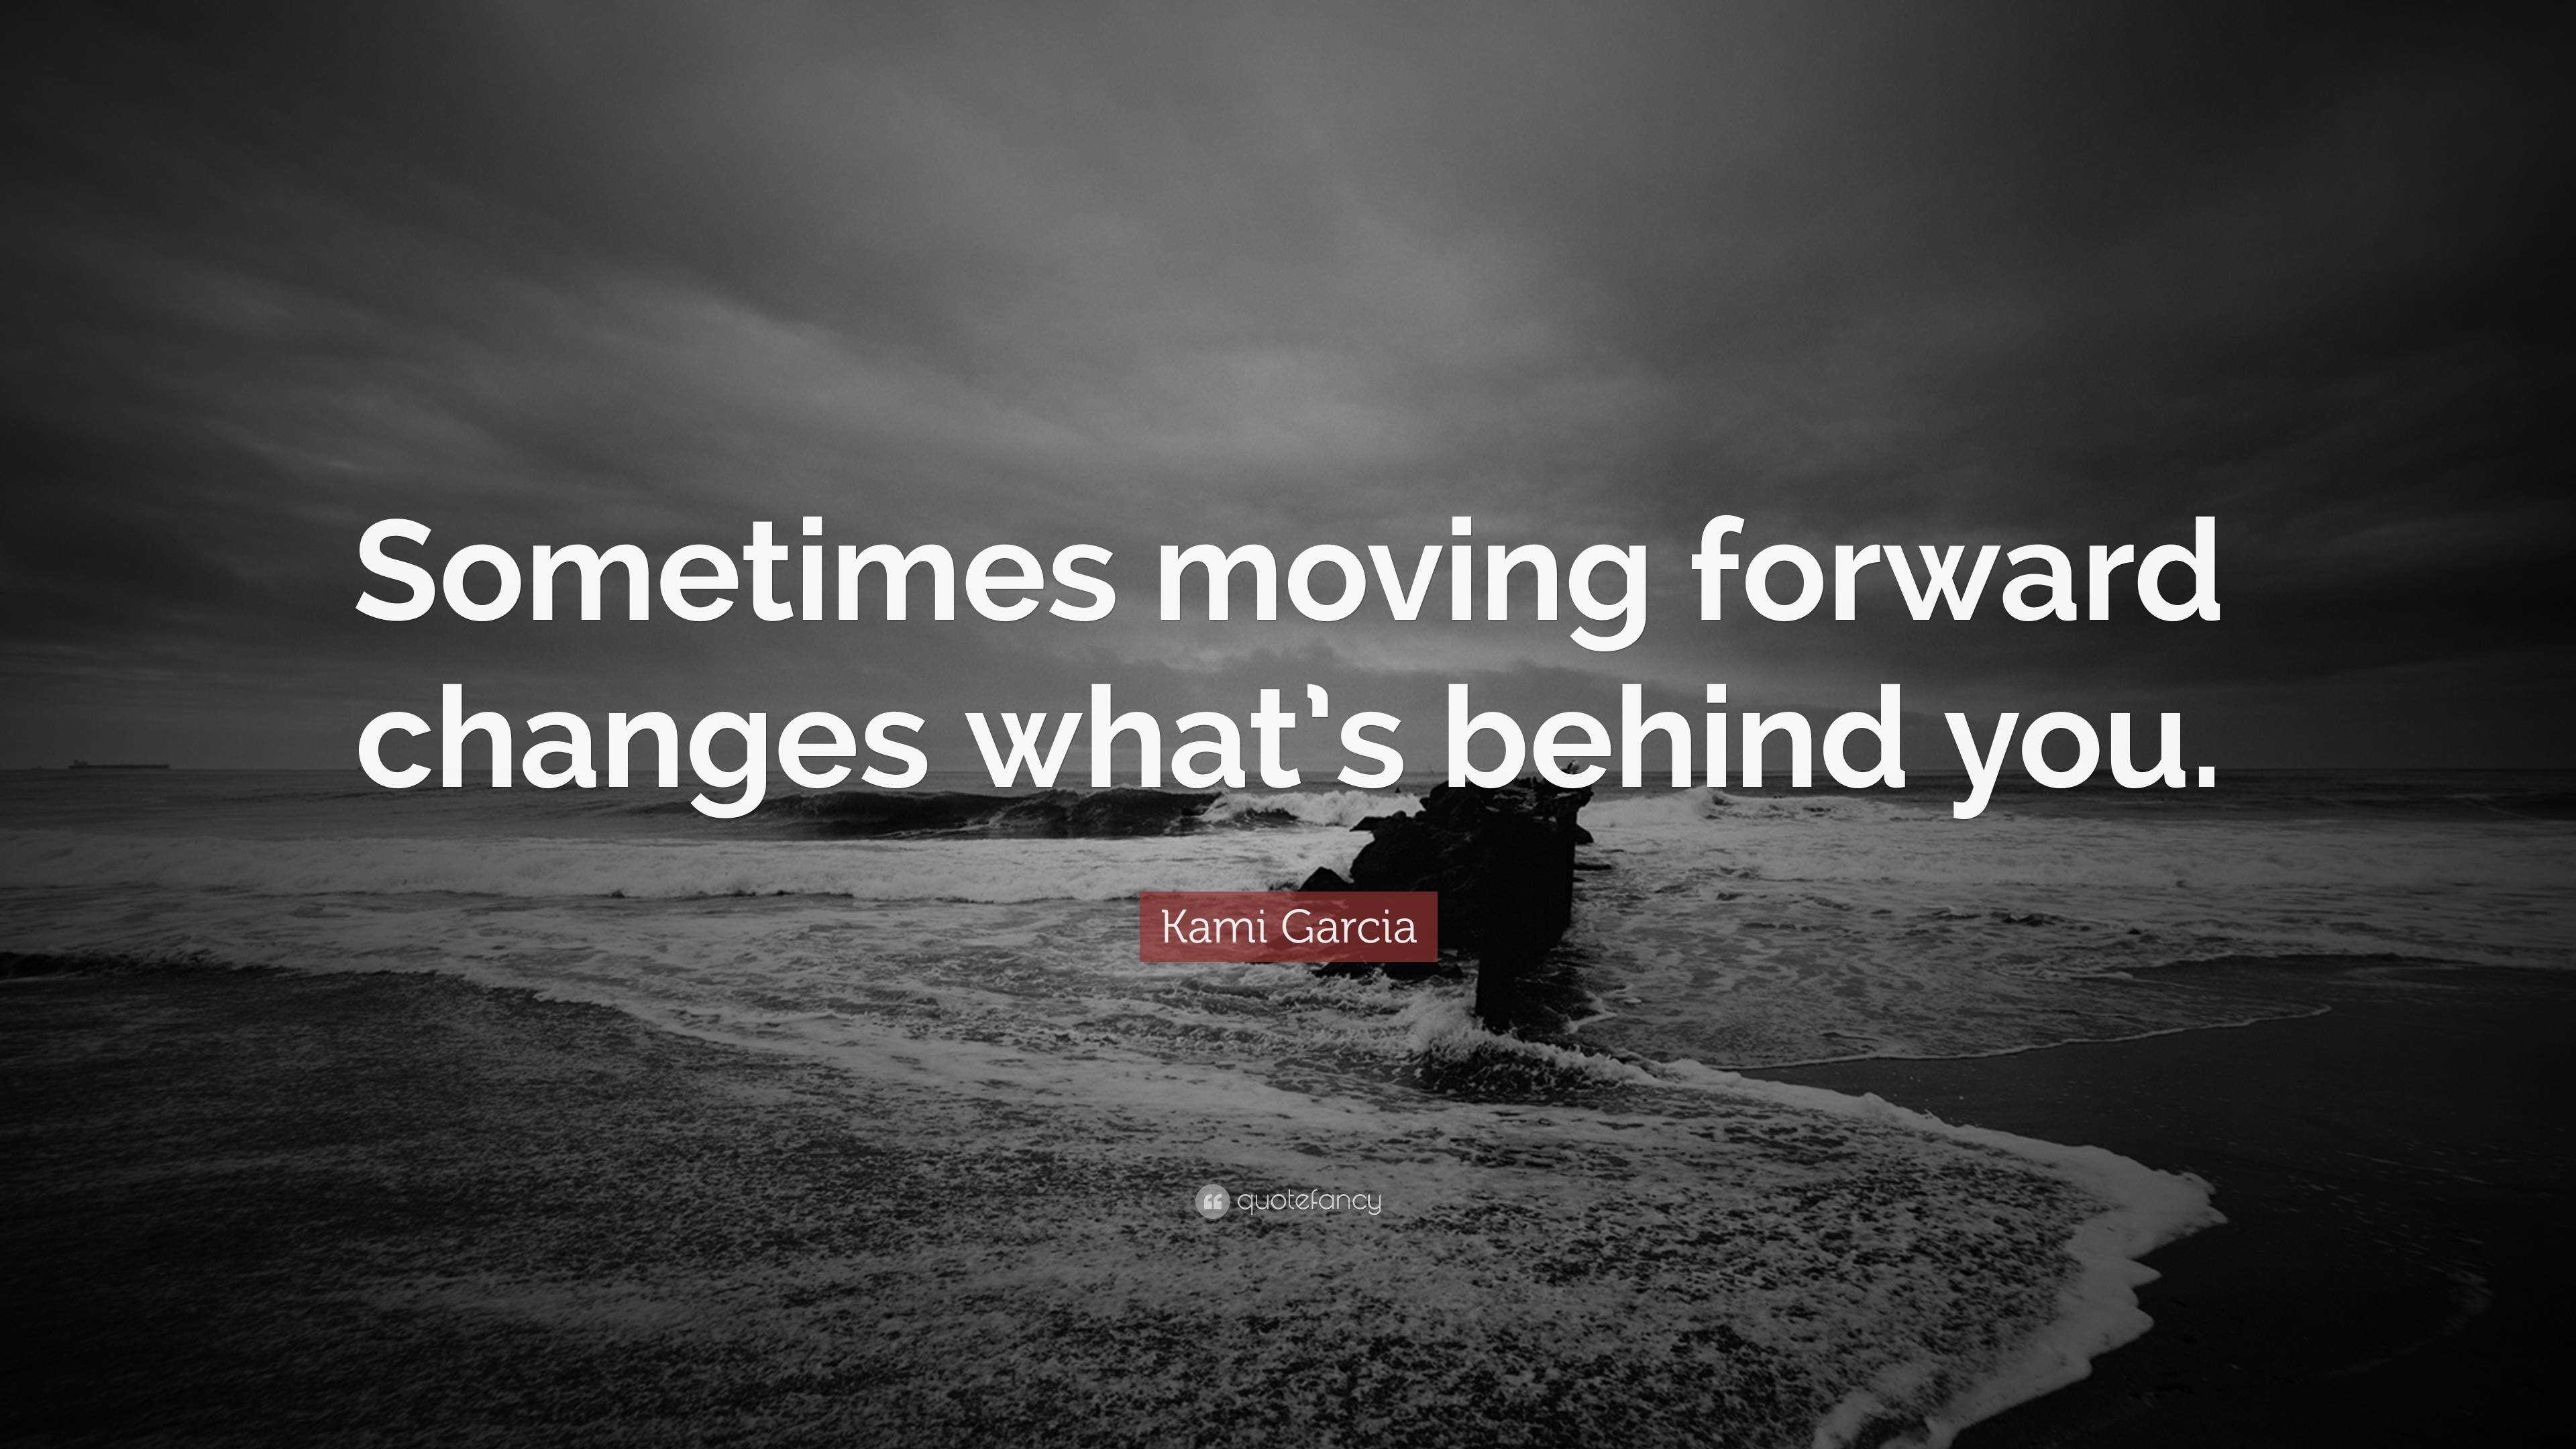 Kami Garcia Quote: “Sometimes moving forward changes what’s behind you.”